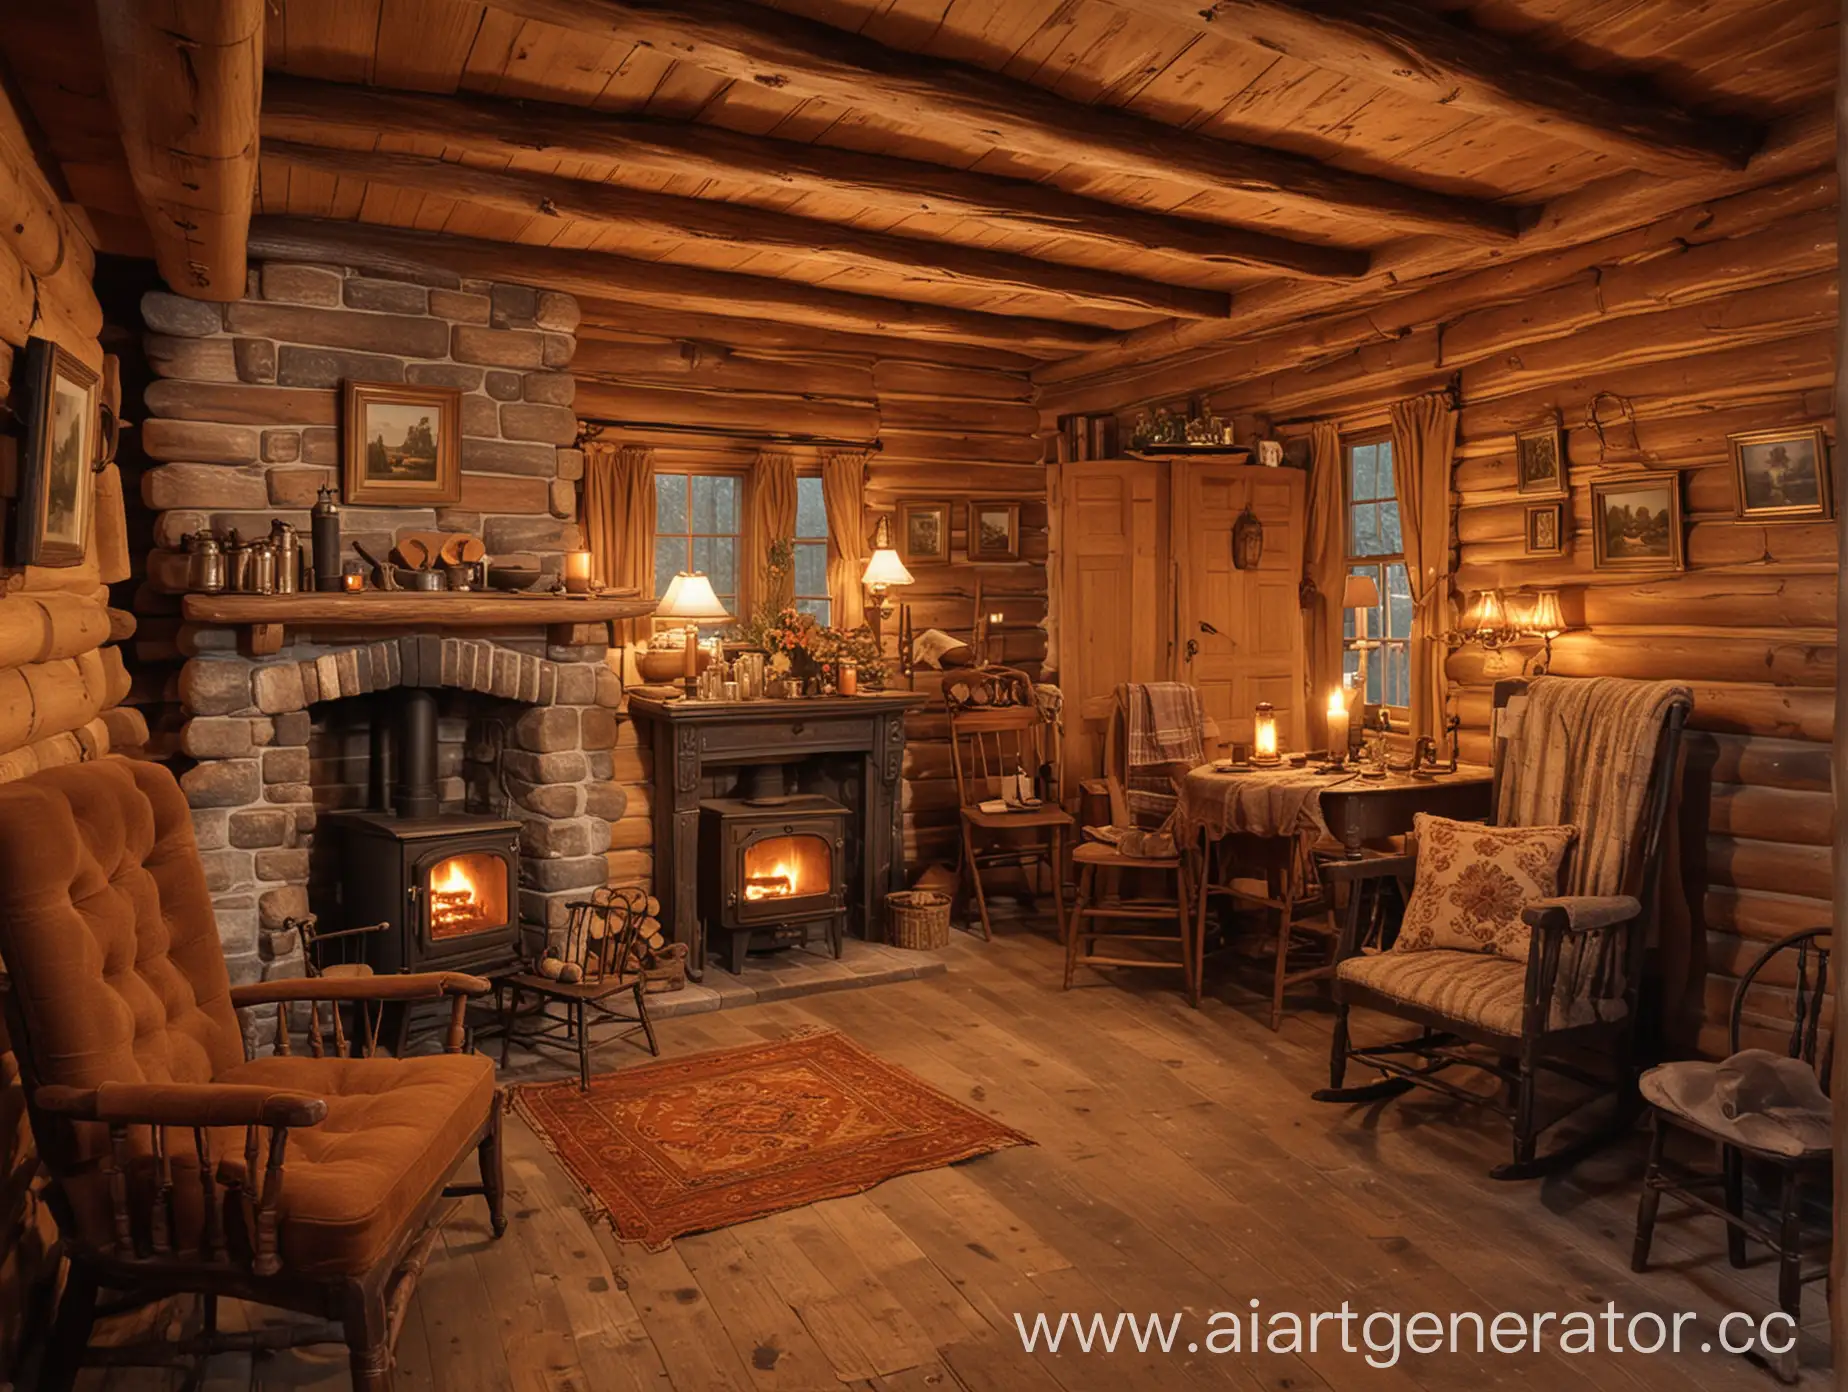 19th-Century-Log-Cabin-Interior-with-Amber-Glow-and-Crackling-Stove-Fire